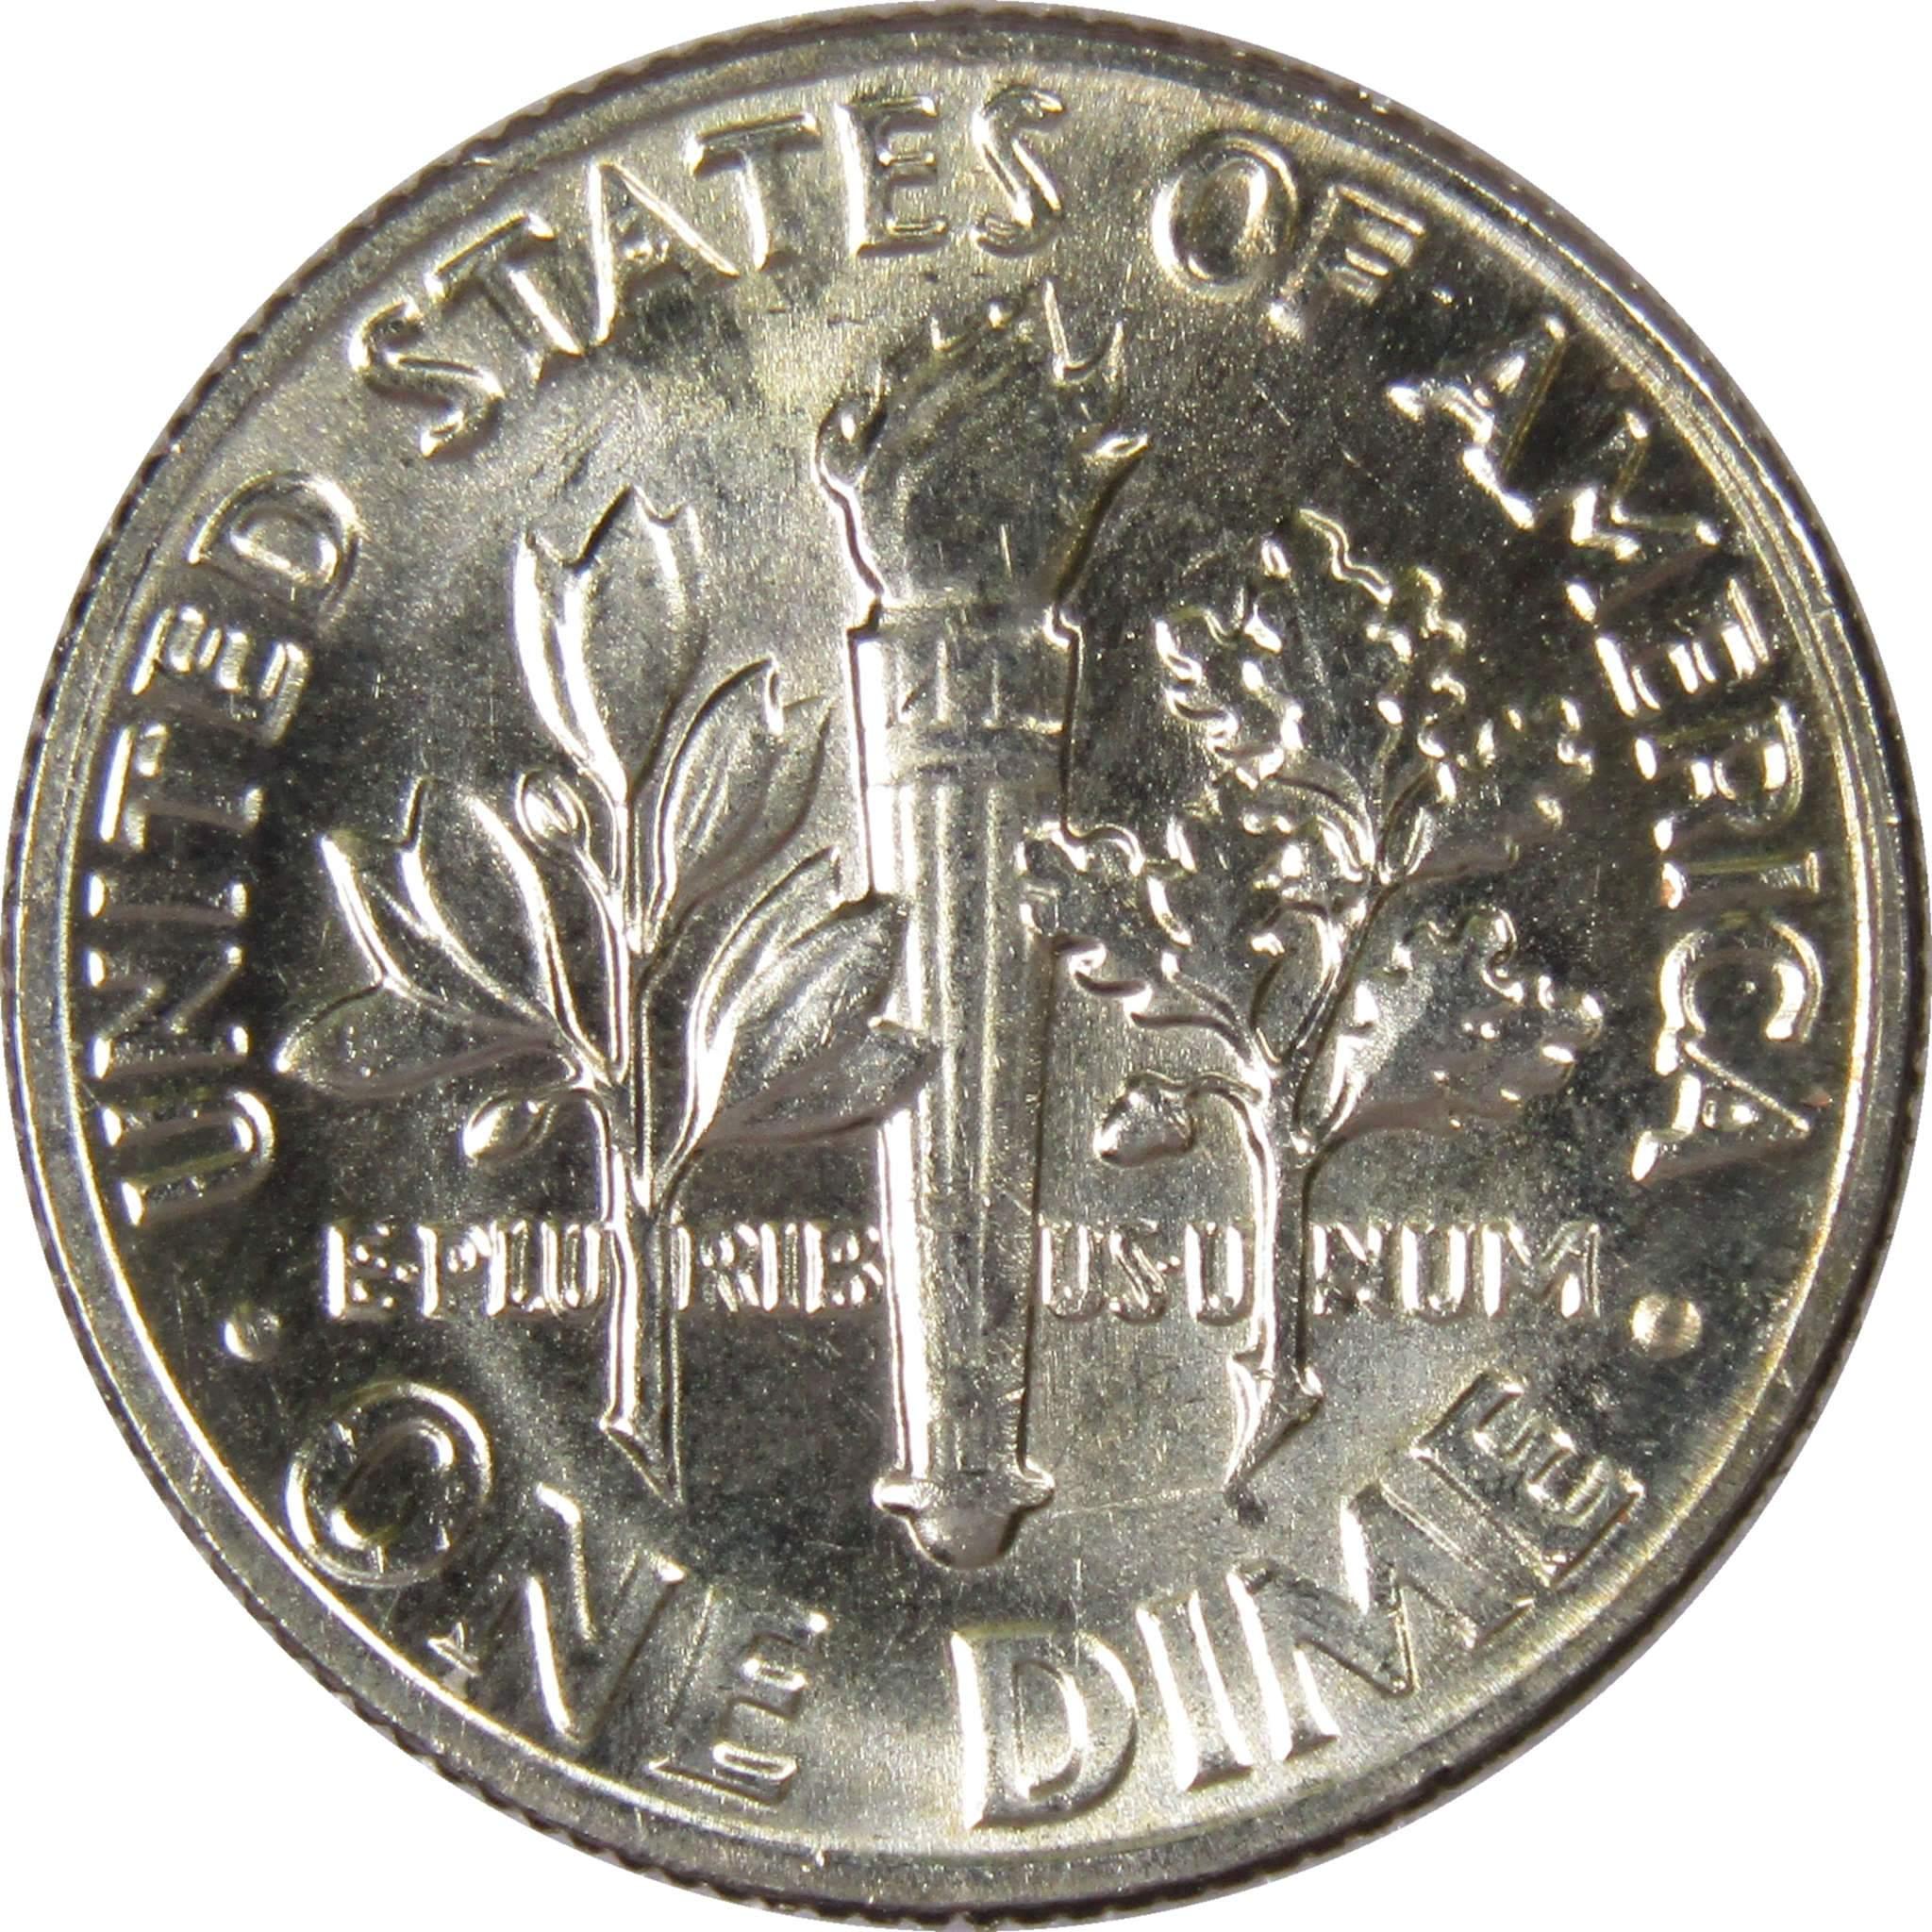 1976 Roosevelt Dime BU Uncirculated Mint State 10c US Coin Collectible